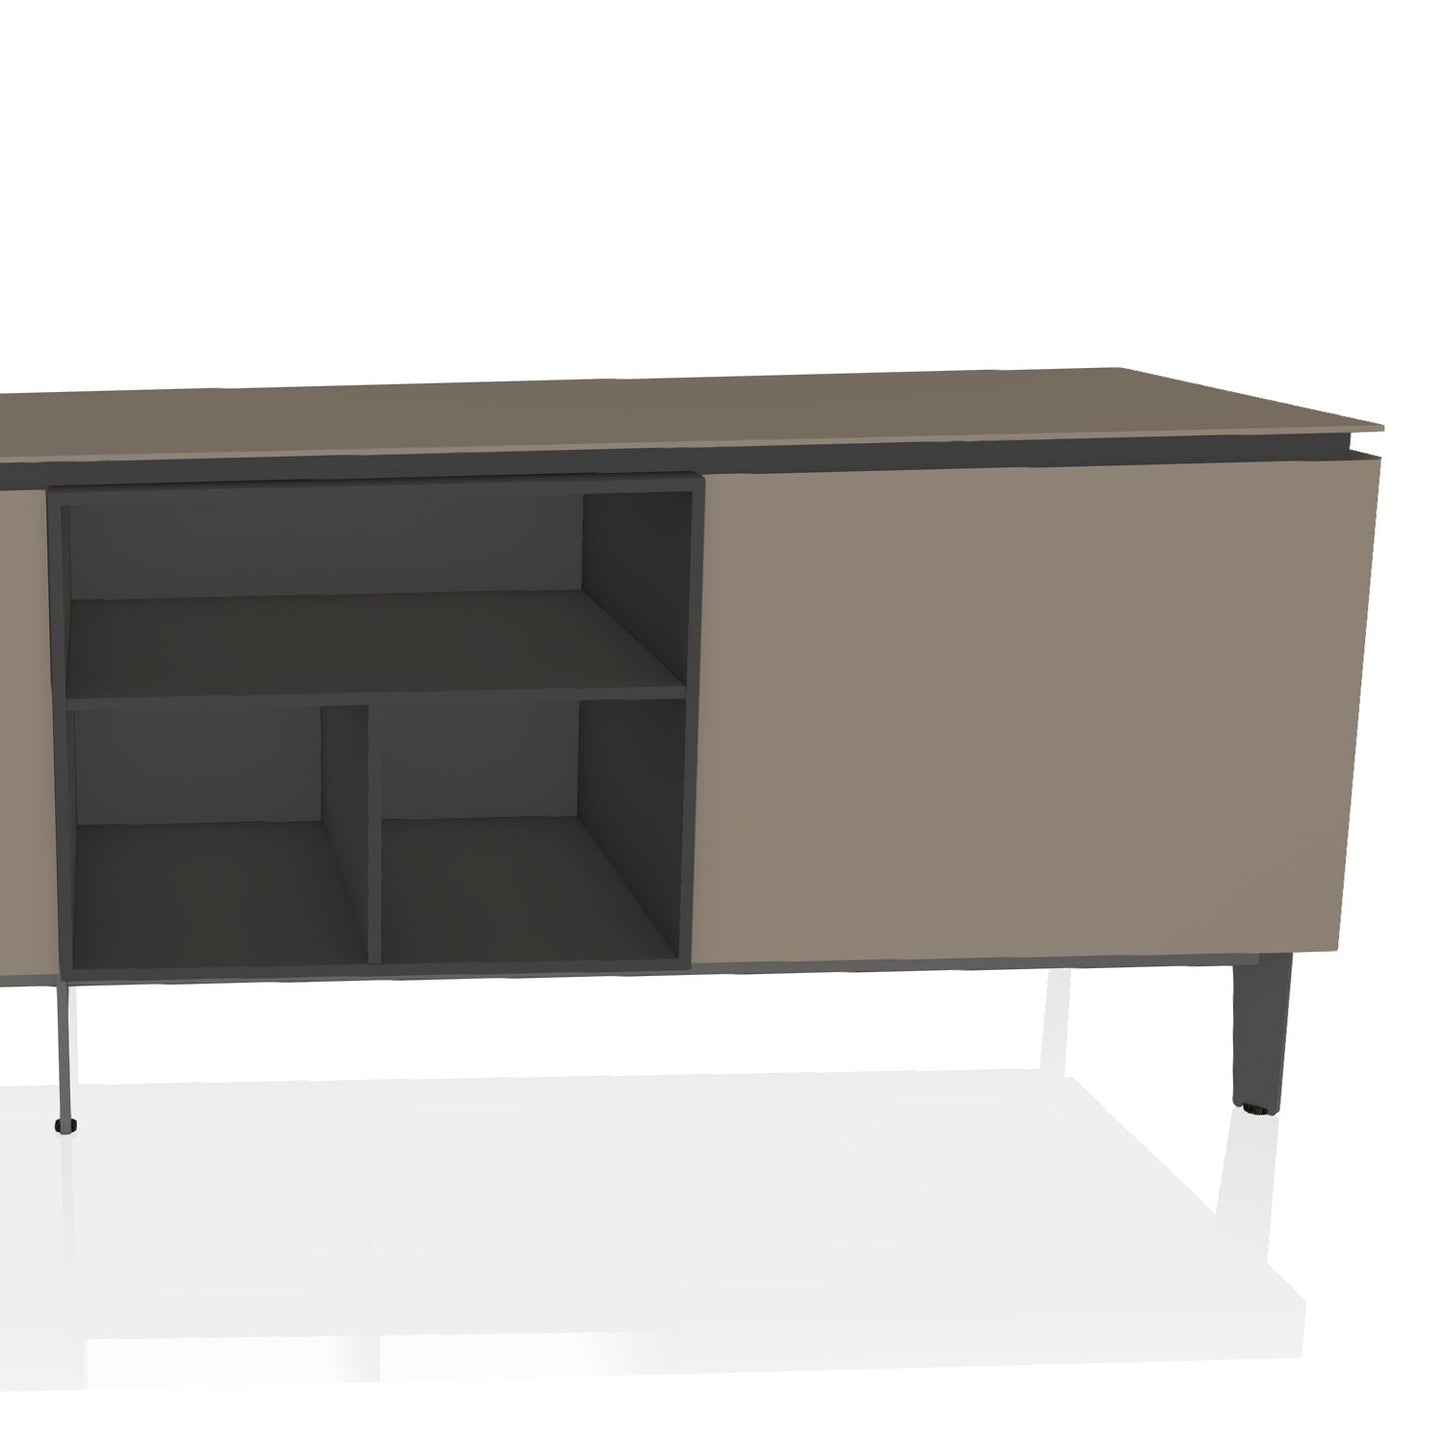 Cosmopolitan 244cm Lacquered Wood Sideboard By Bontempi Casa - In Sand With Anthracite Cut Out & Legs